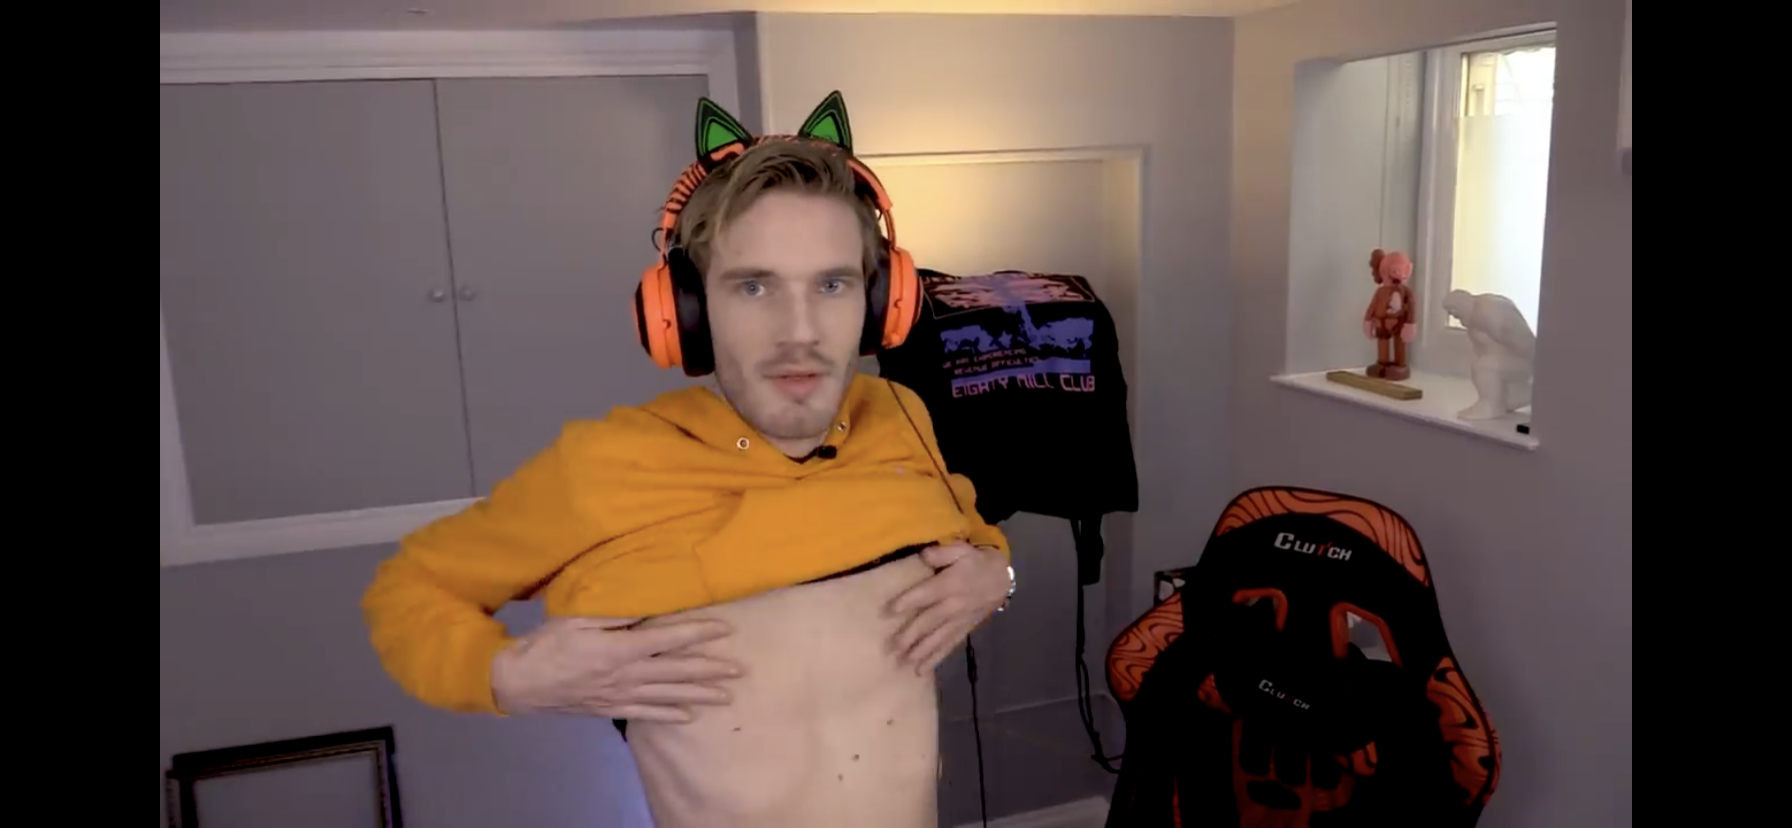 No "Naked pewdiepie" memes have been featured yet. 